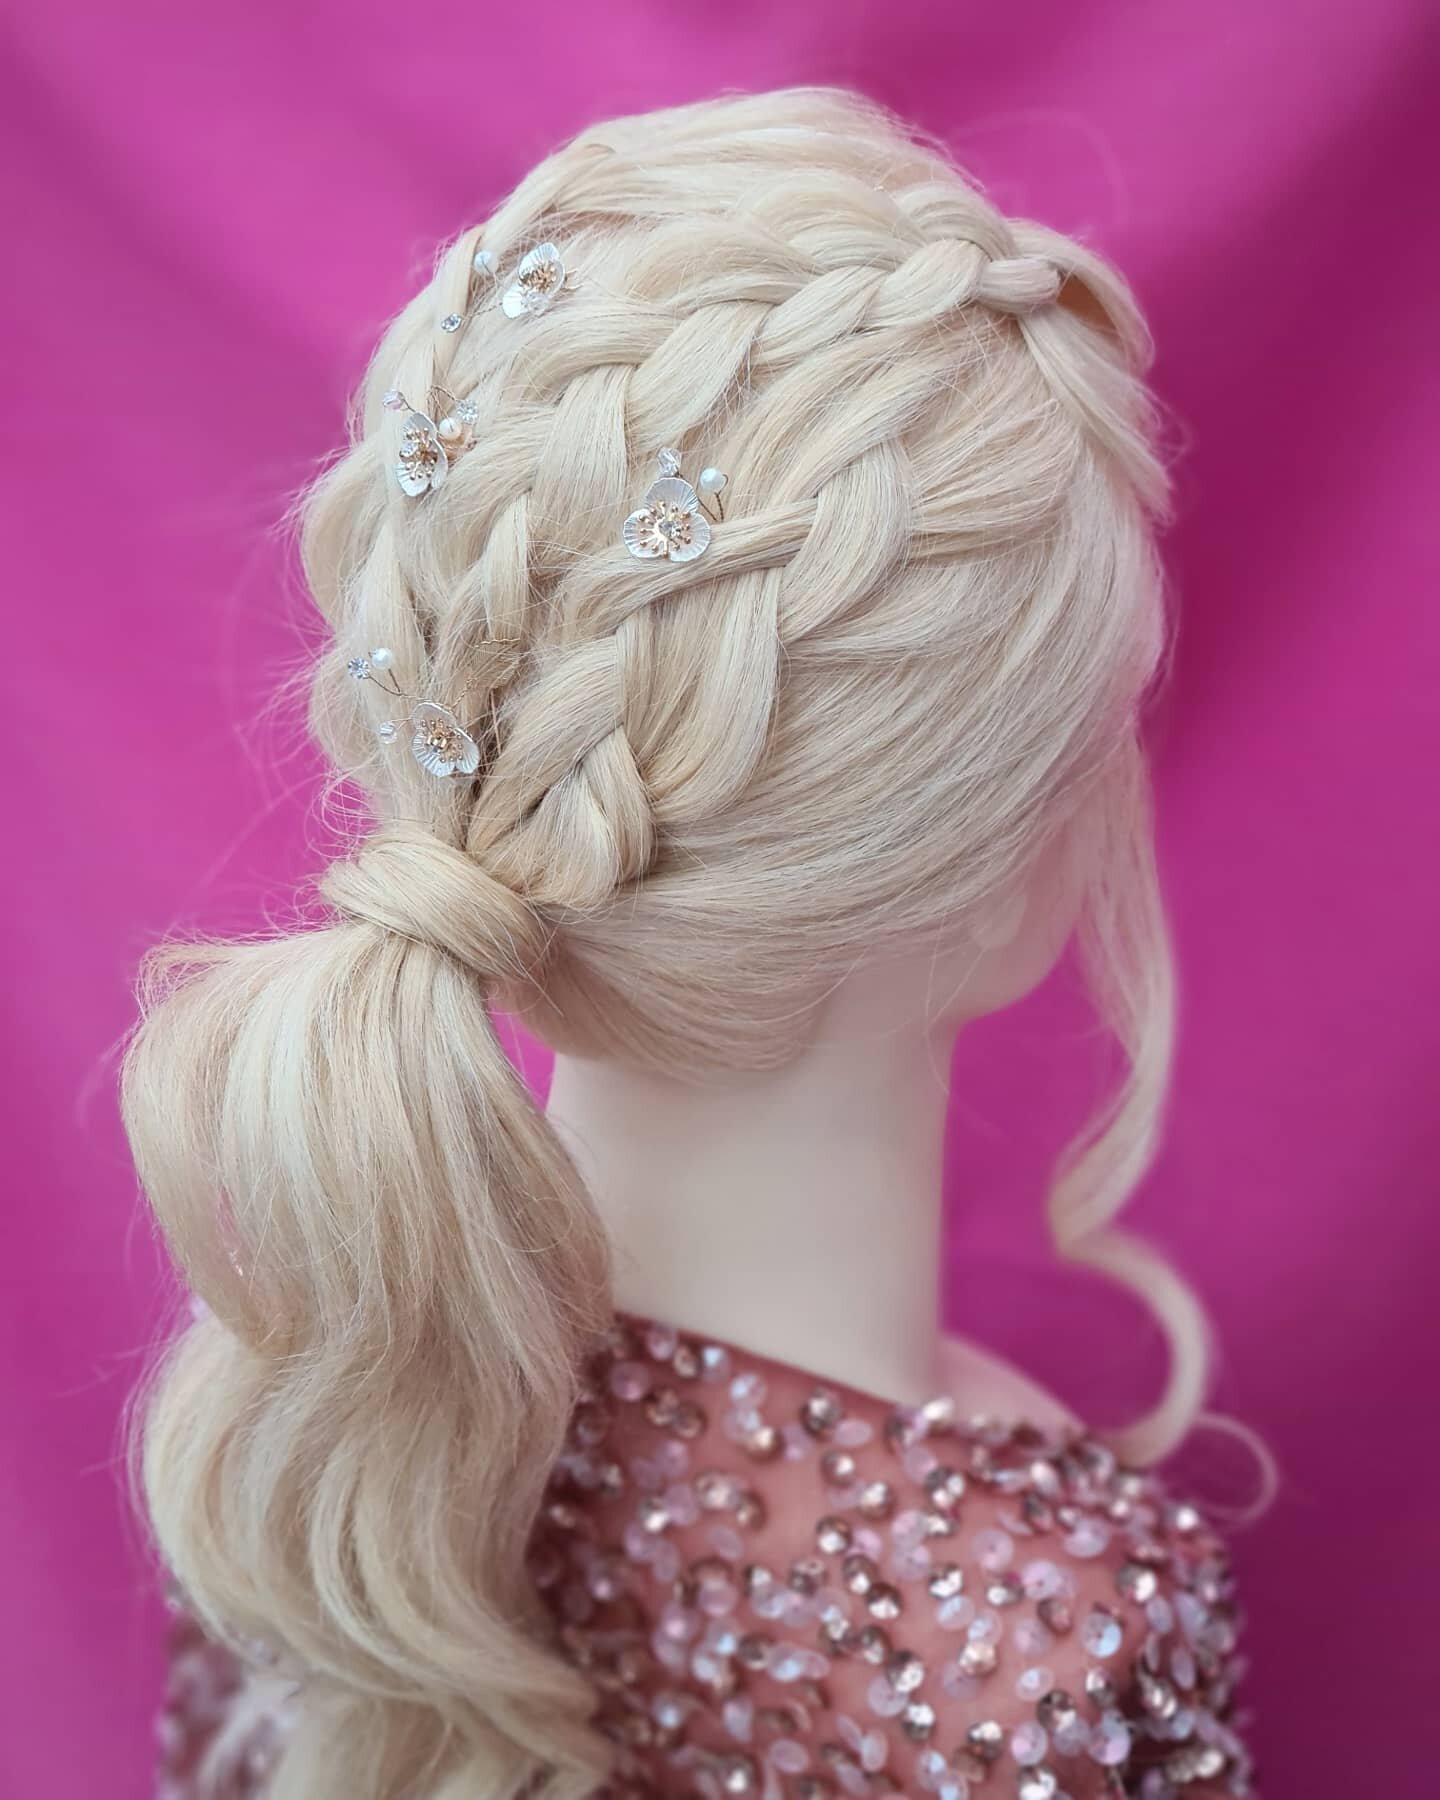 A three braid pony for some extra sass 💗💁🏼&zwj;♀️ I love a classic ponytail for a wedding; so simple, elegant &amp; can be worn so many different ways! Xx